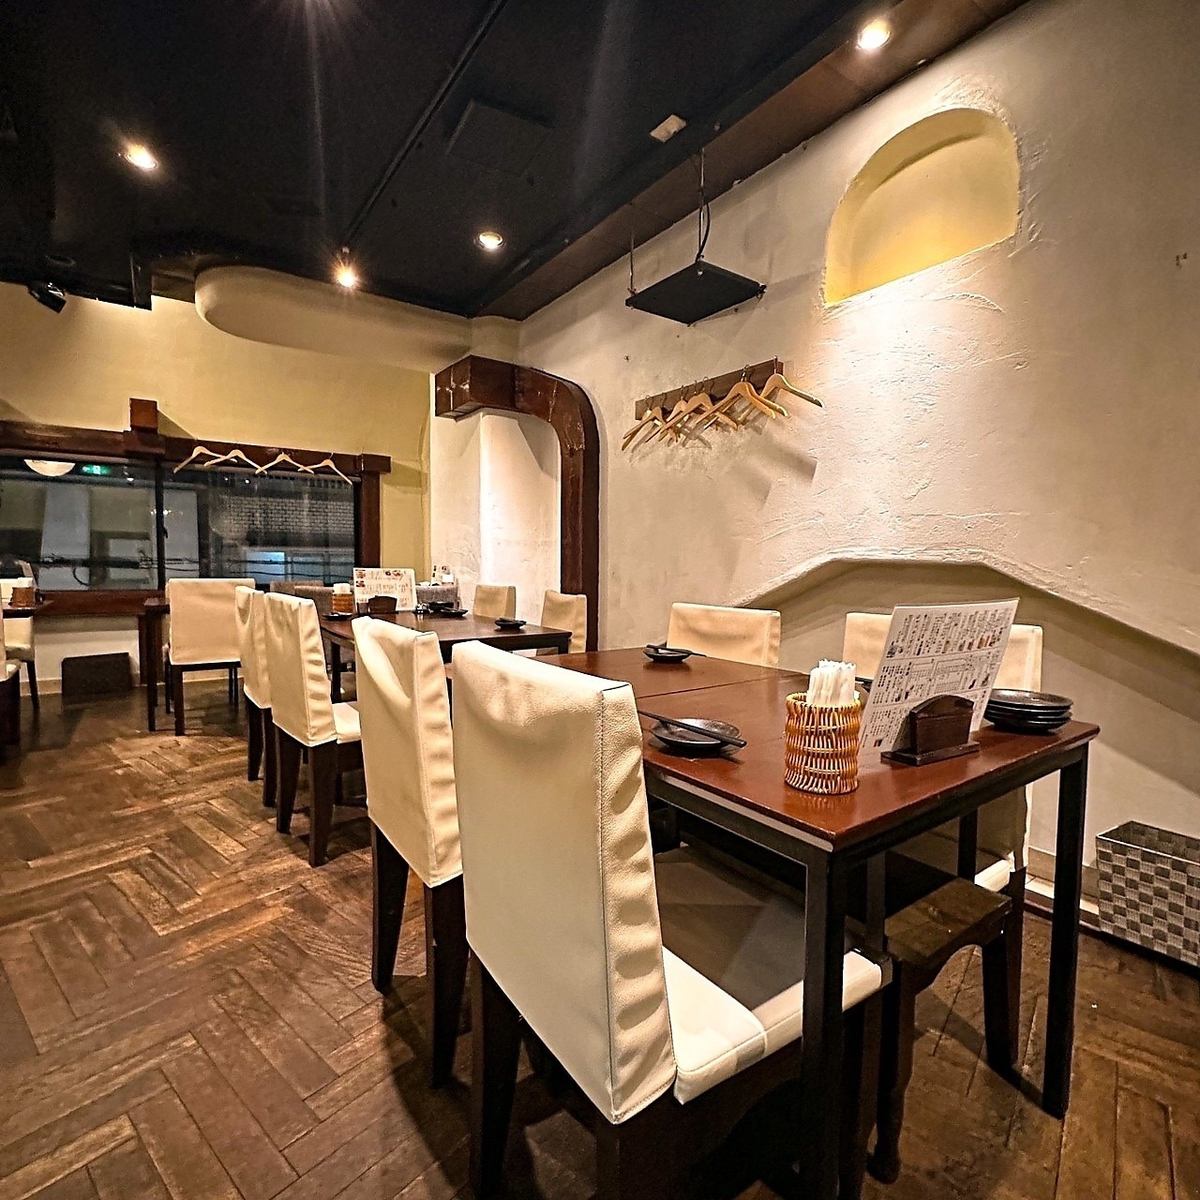 The modern atmosphere is the appeal of set meals and izakaya yoridokoro!